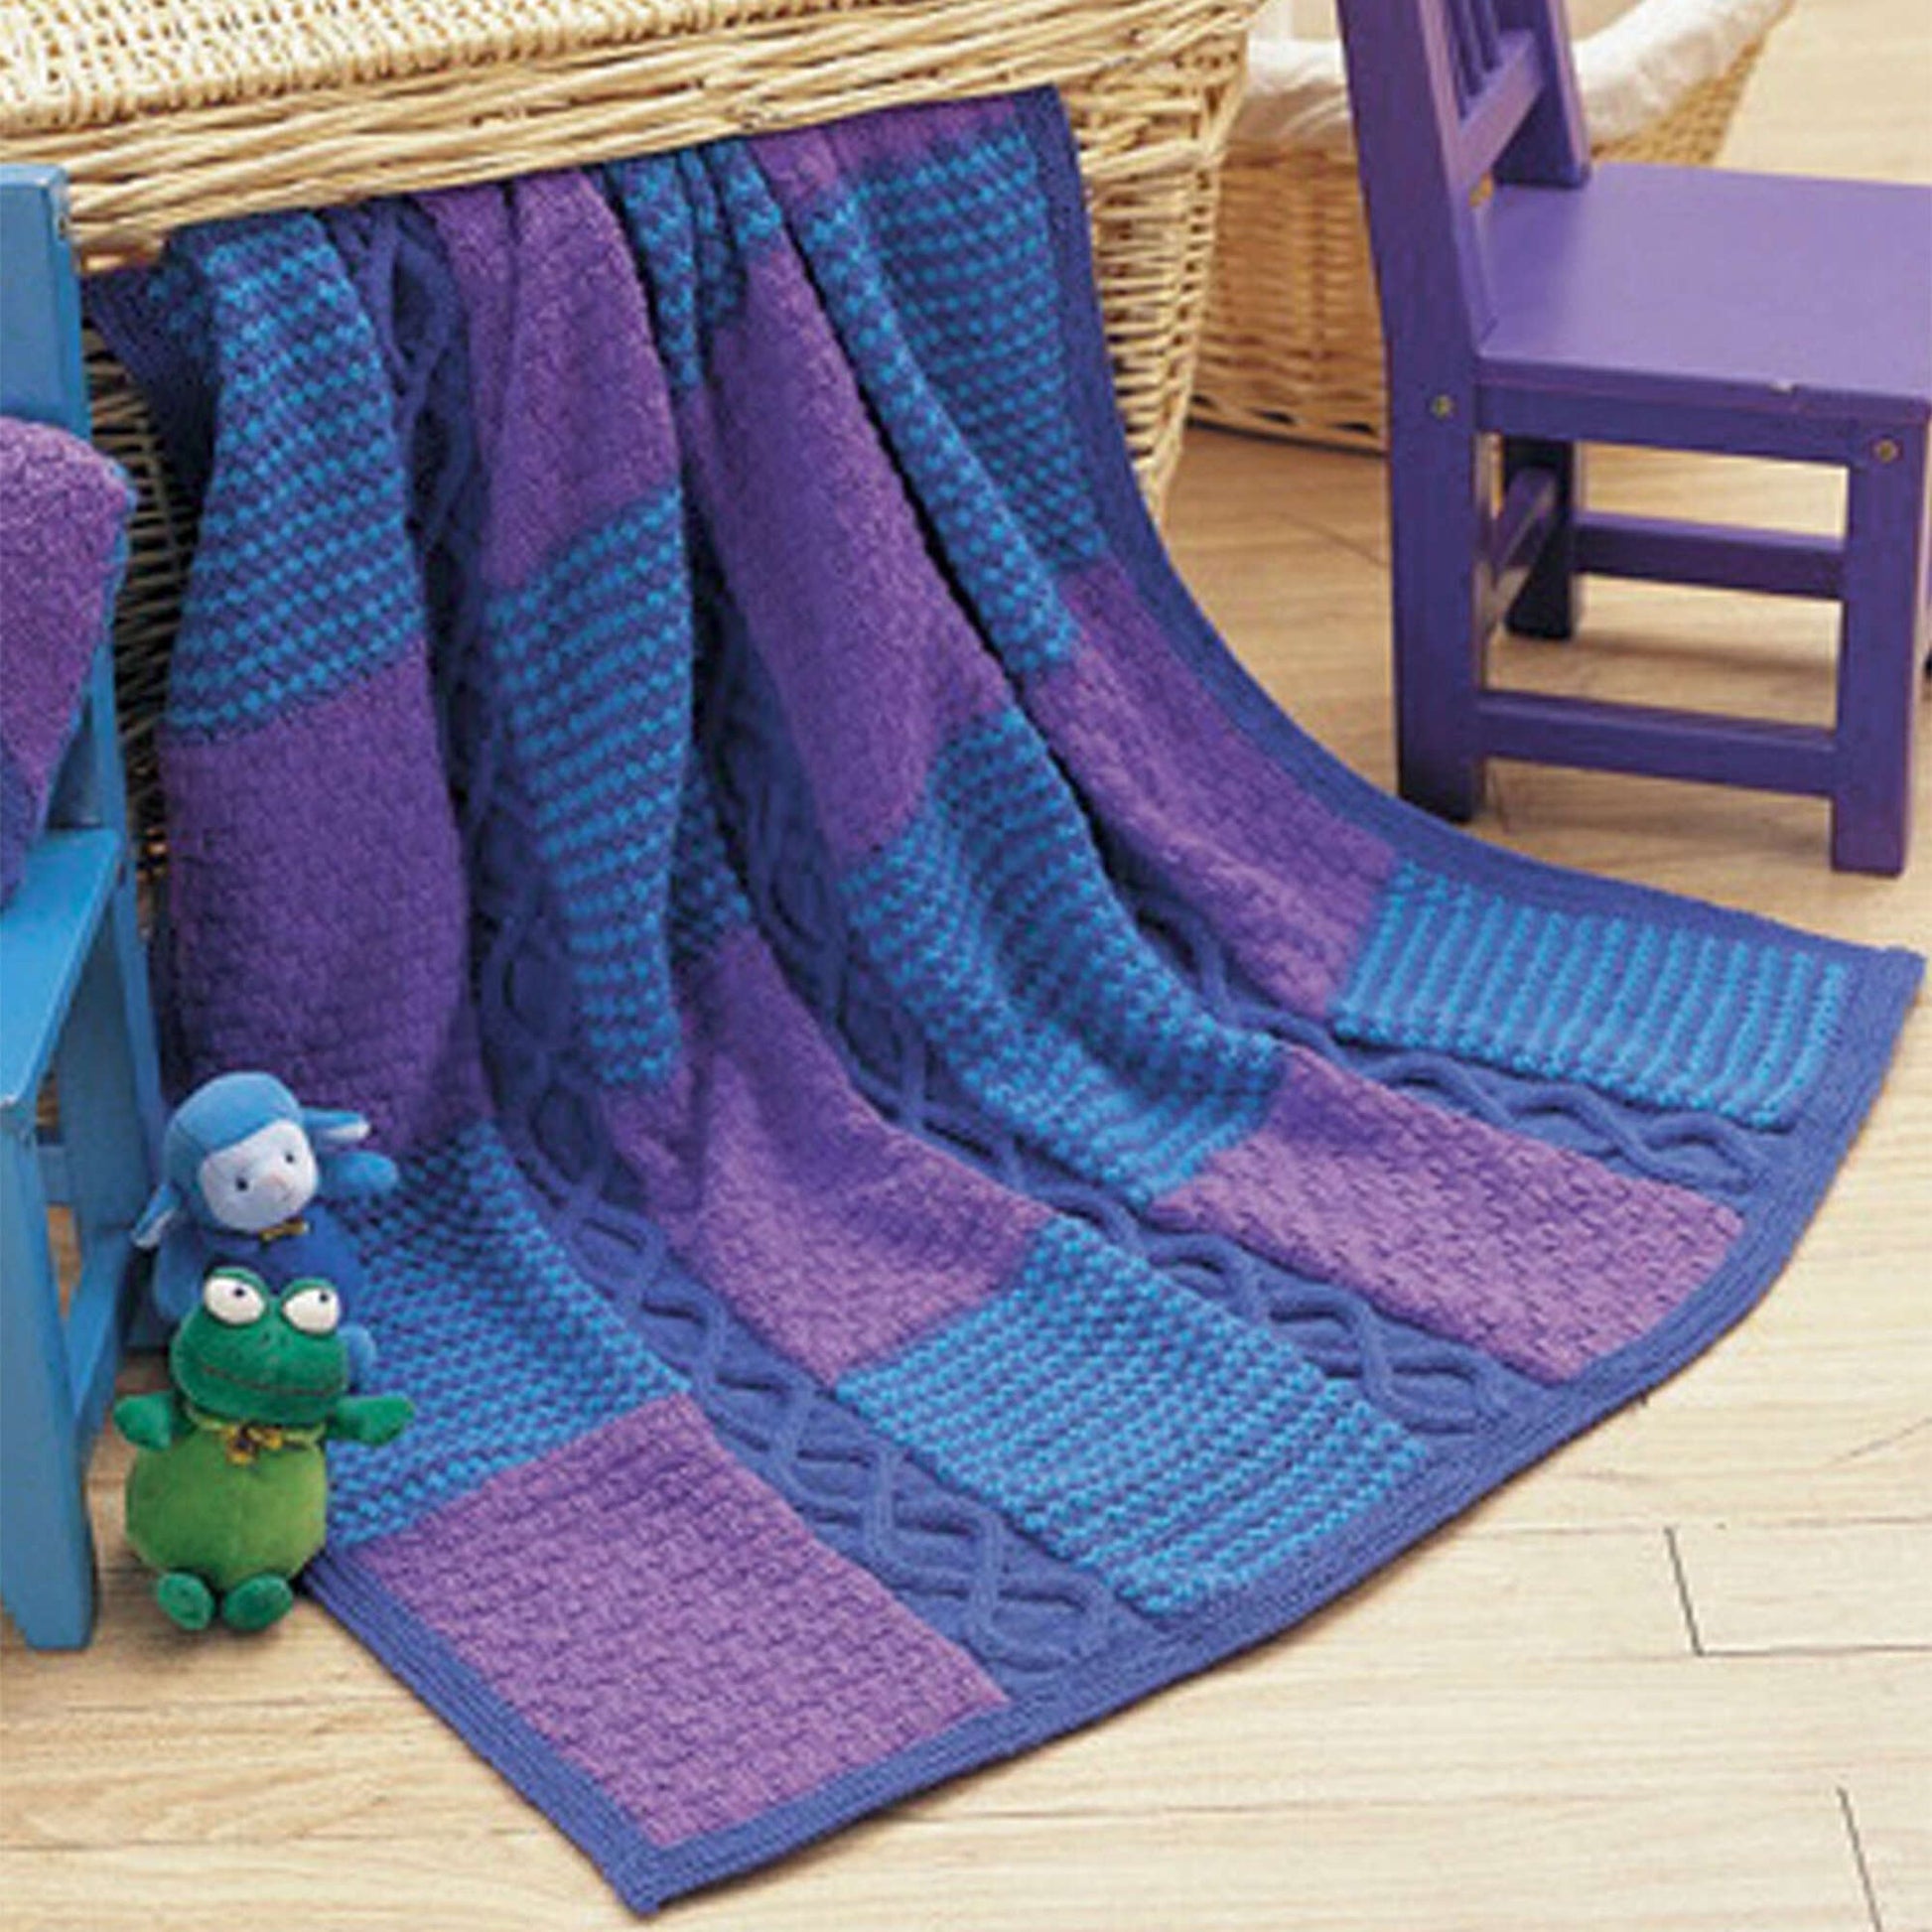 Free Patons Cables And Checks Knit Blanket & Pillow Set Pattern